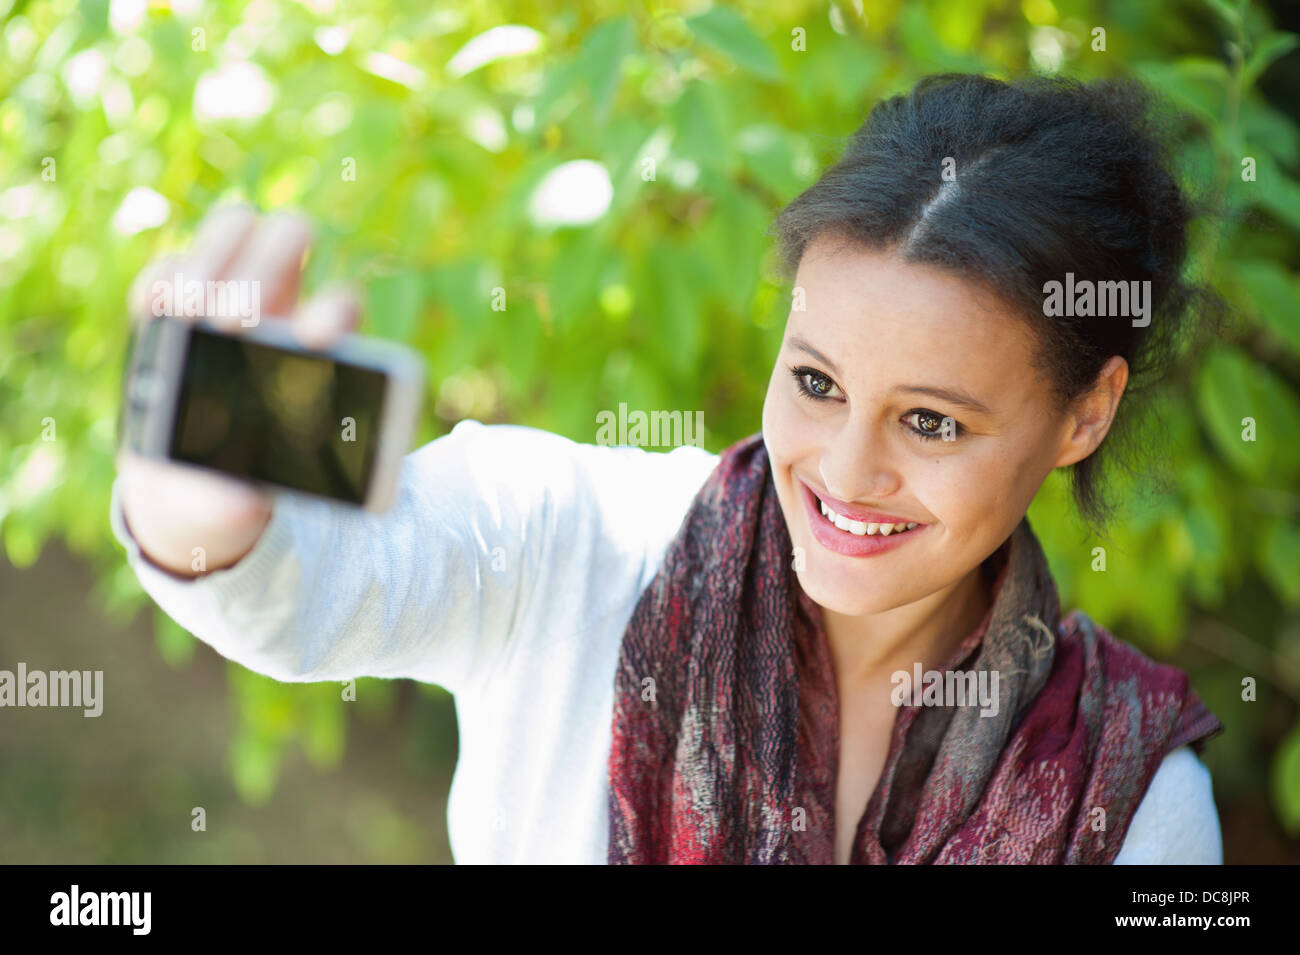 Young woman with a cellphone Stock Photo